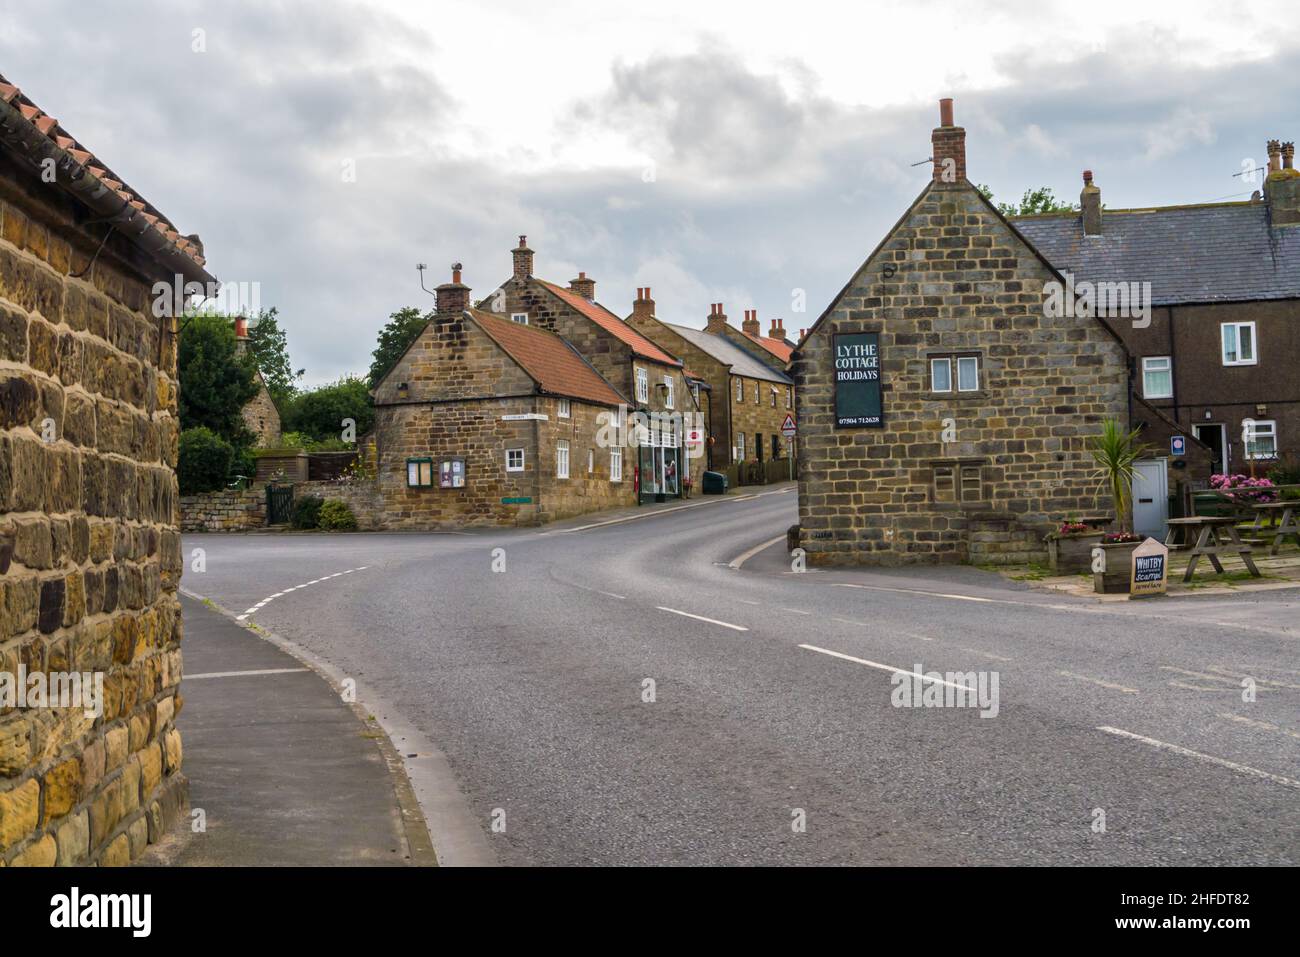 The Village of Lythe, Scarborough, North Yorkshire Stock Photo